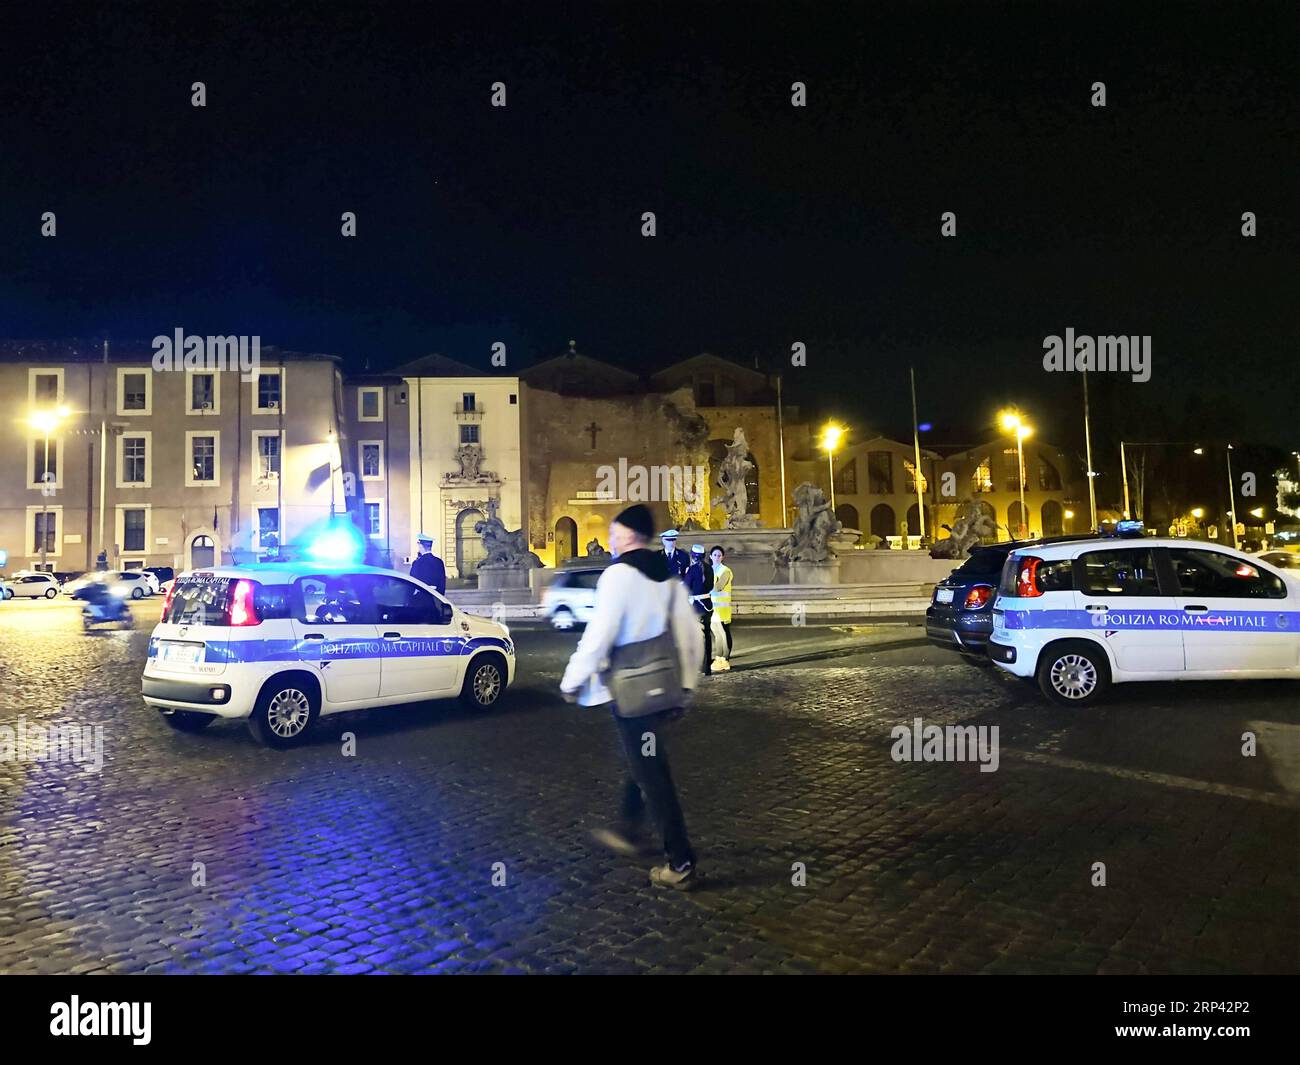 (181023) -- ROME, Oct. 23, 2018 -- Police cars are seen near the metro station where an escalator collapsed in Rome, Italy, on Oct. 23, 2018. At least 20 Russian football fans were injured when an escalator at a busy Rome metro station collapsed on Tuesday night, local media reported. ) ITALY-ROME-METRO-ESCALATOR-COLLAPSE ChenxZhanjie PUBLICATIONxNOTxINxCHN Stock Photo